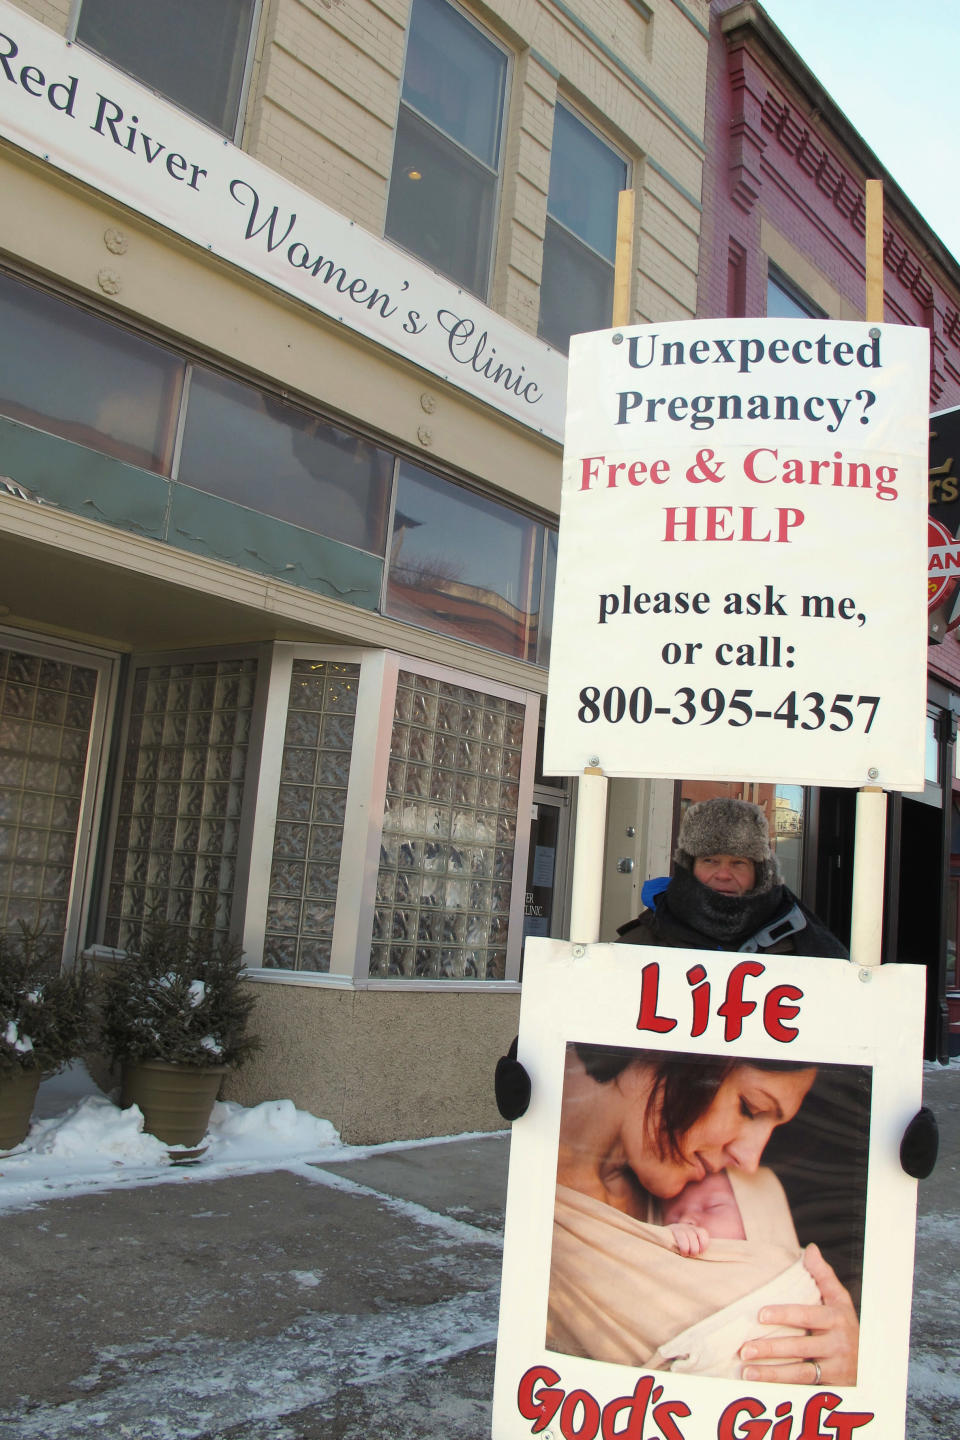 FILE - An abortion protester stands outside the Red River Valley Women's Clinic in Fargo, N.D., on Feb. 20, 2013. North Dakota's only abortion clinic filed a lawsuit Thursday, July 7, 2022, seeking to block enforcement of the state's trigger law banning abortion in the wake of the Supreme Court's reversal of Roe v. Wade. The Red River Women's Clinic argues that the state constitution protects the right to abortion. (AP Photo/Dave Kolpack, File)